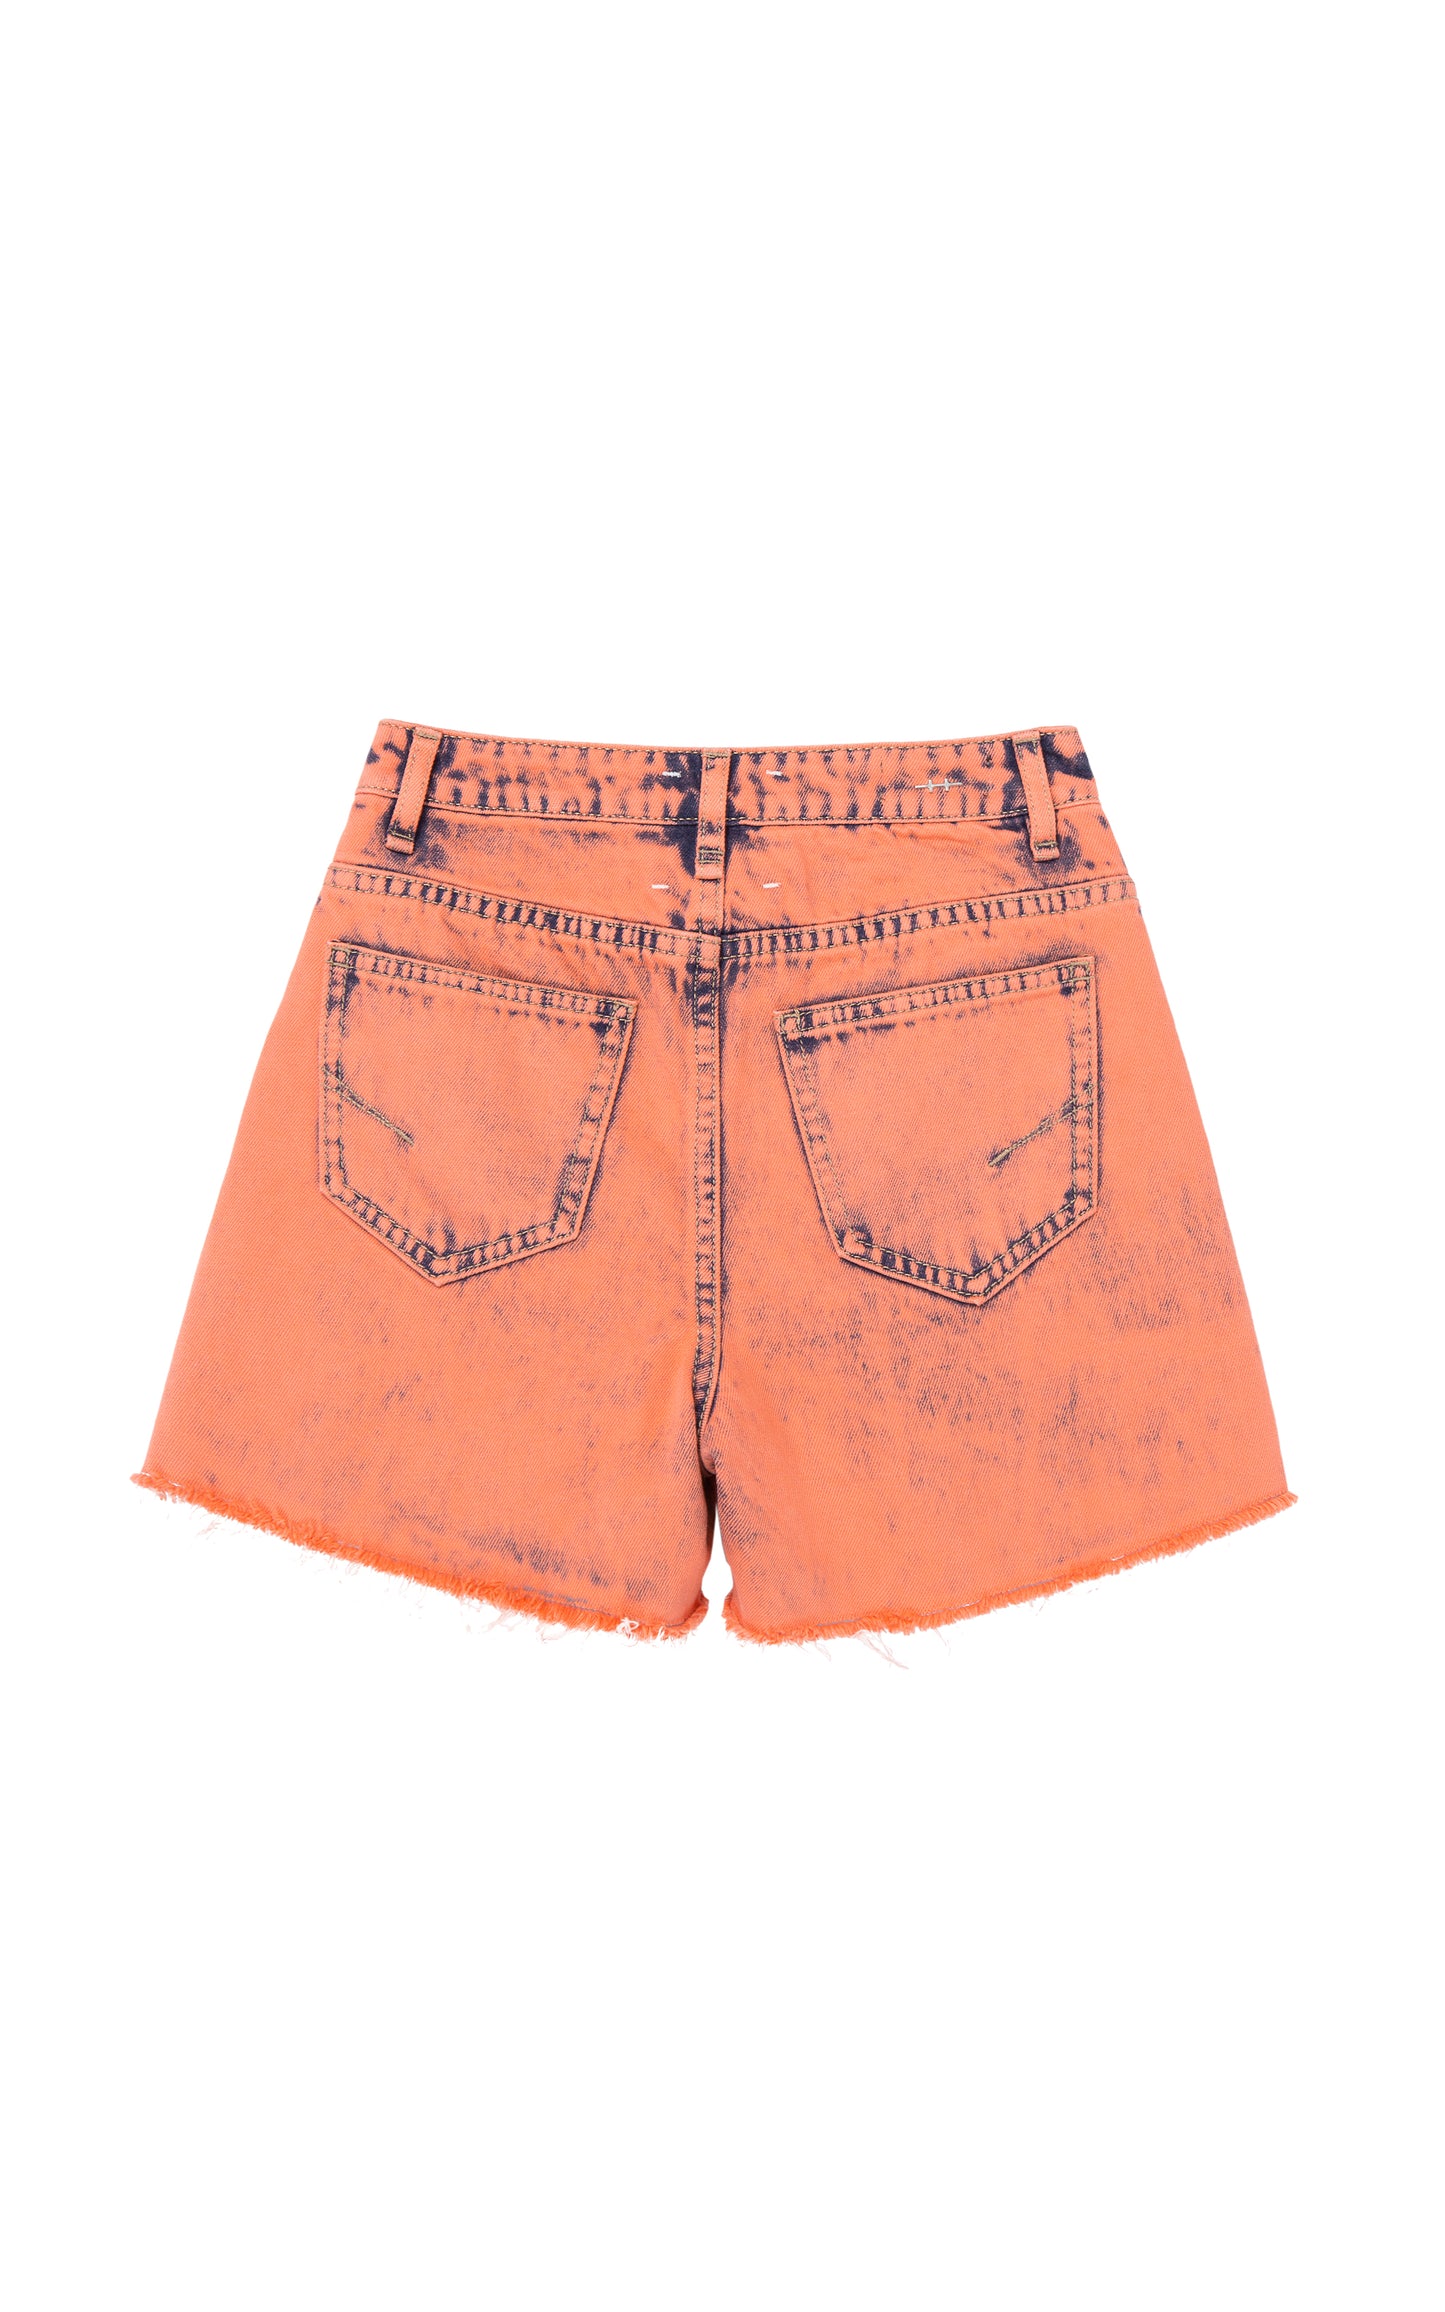 Back of coral, ripped-style high-waisted denim shorts